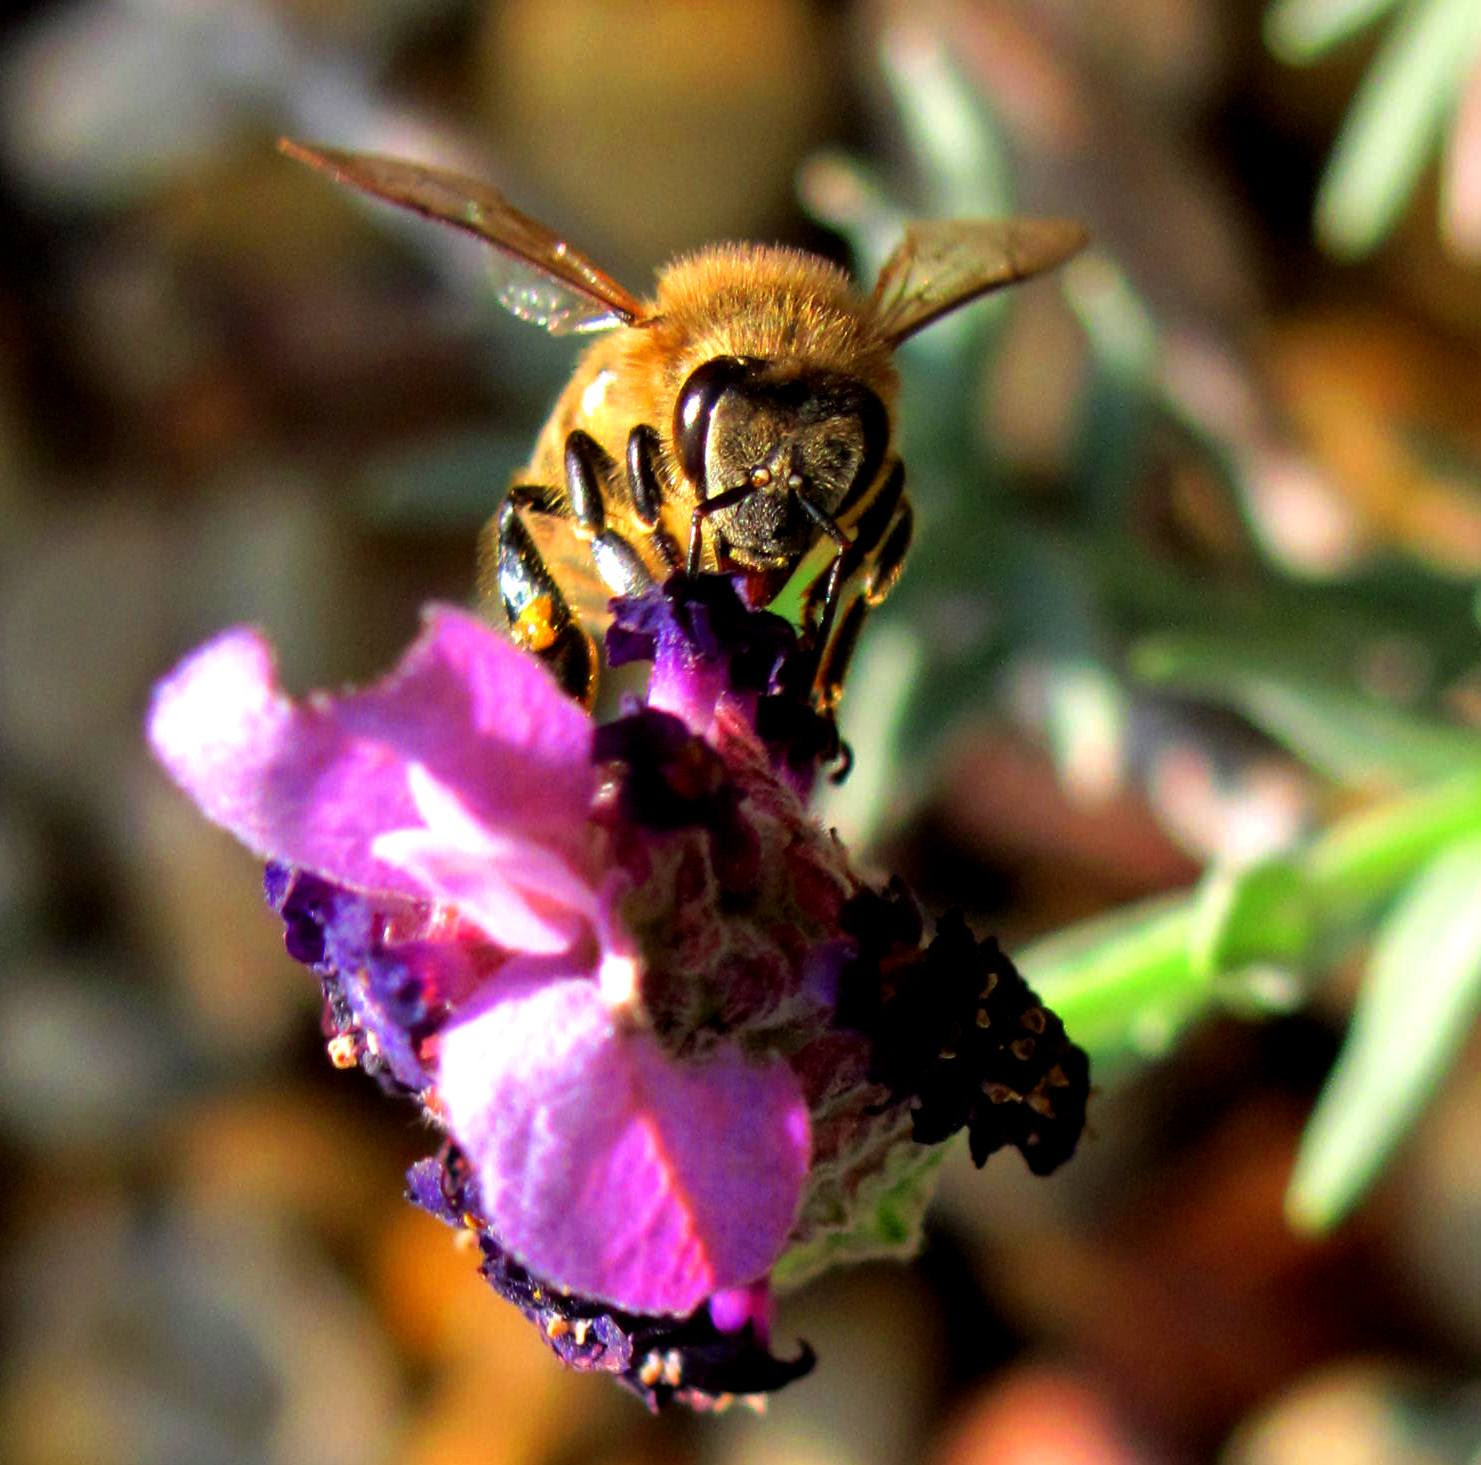 Bees and pollination of Biofuels